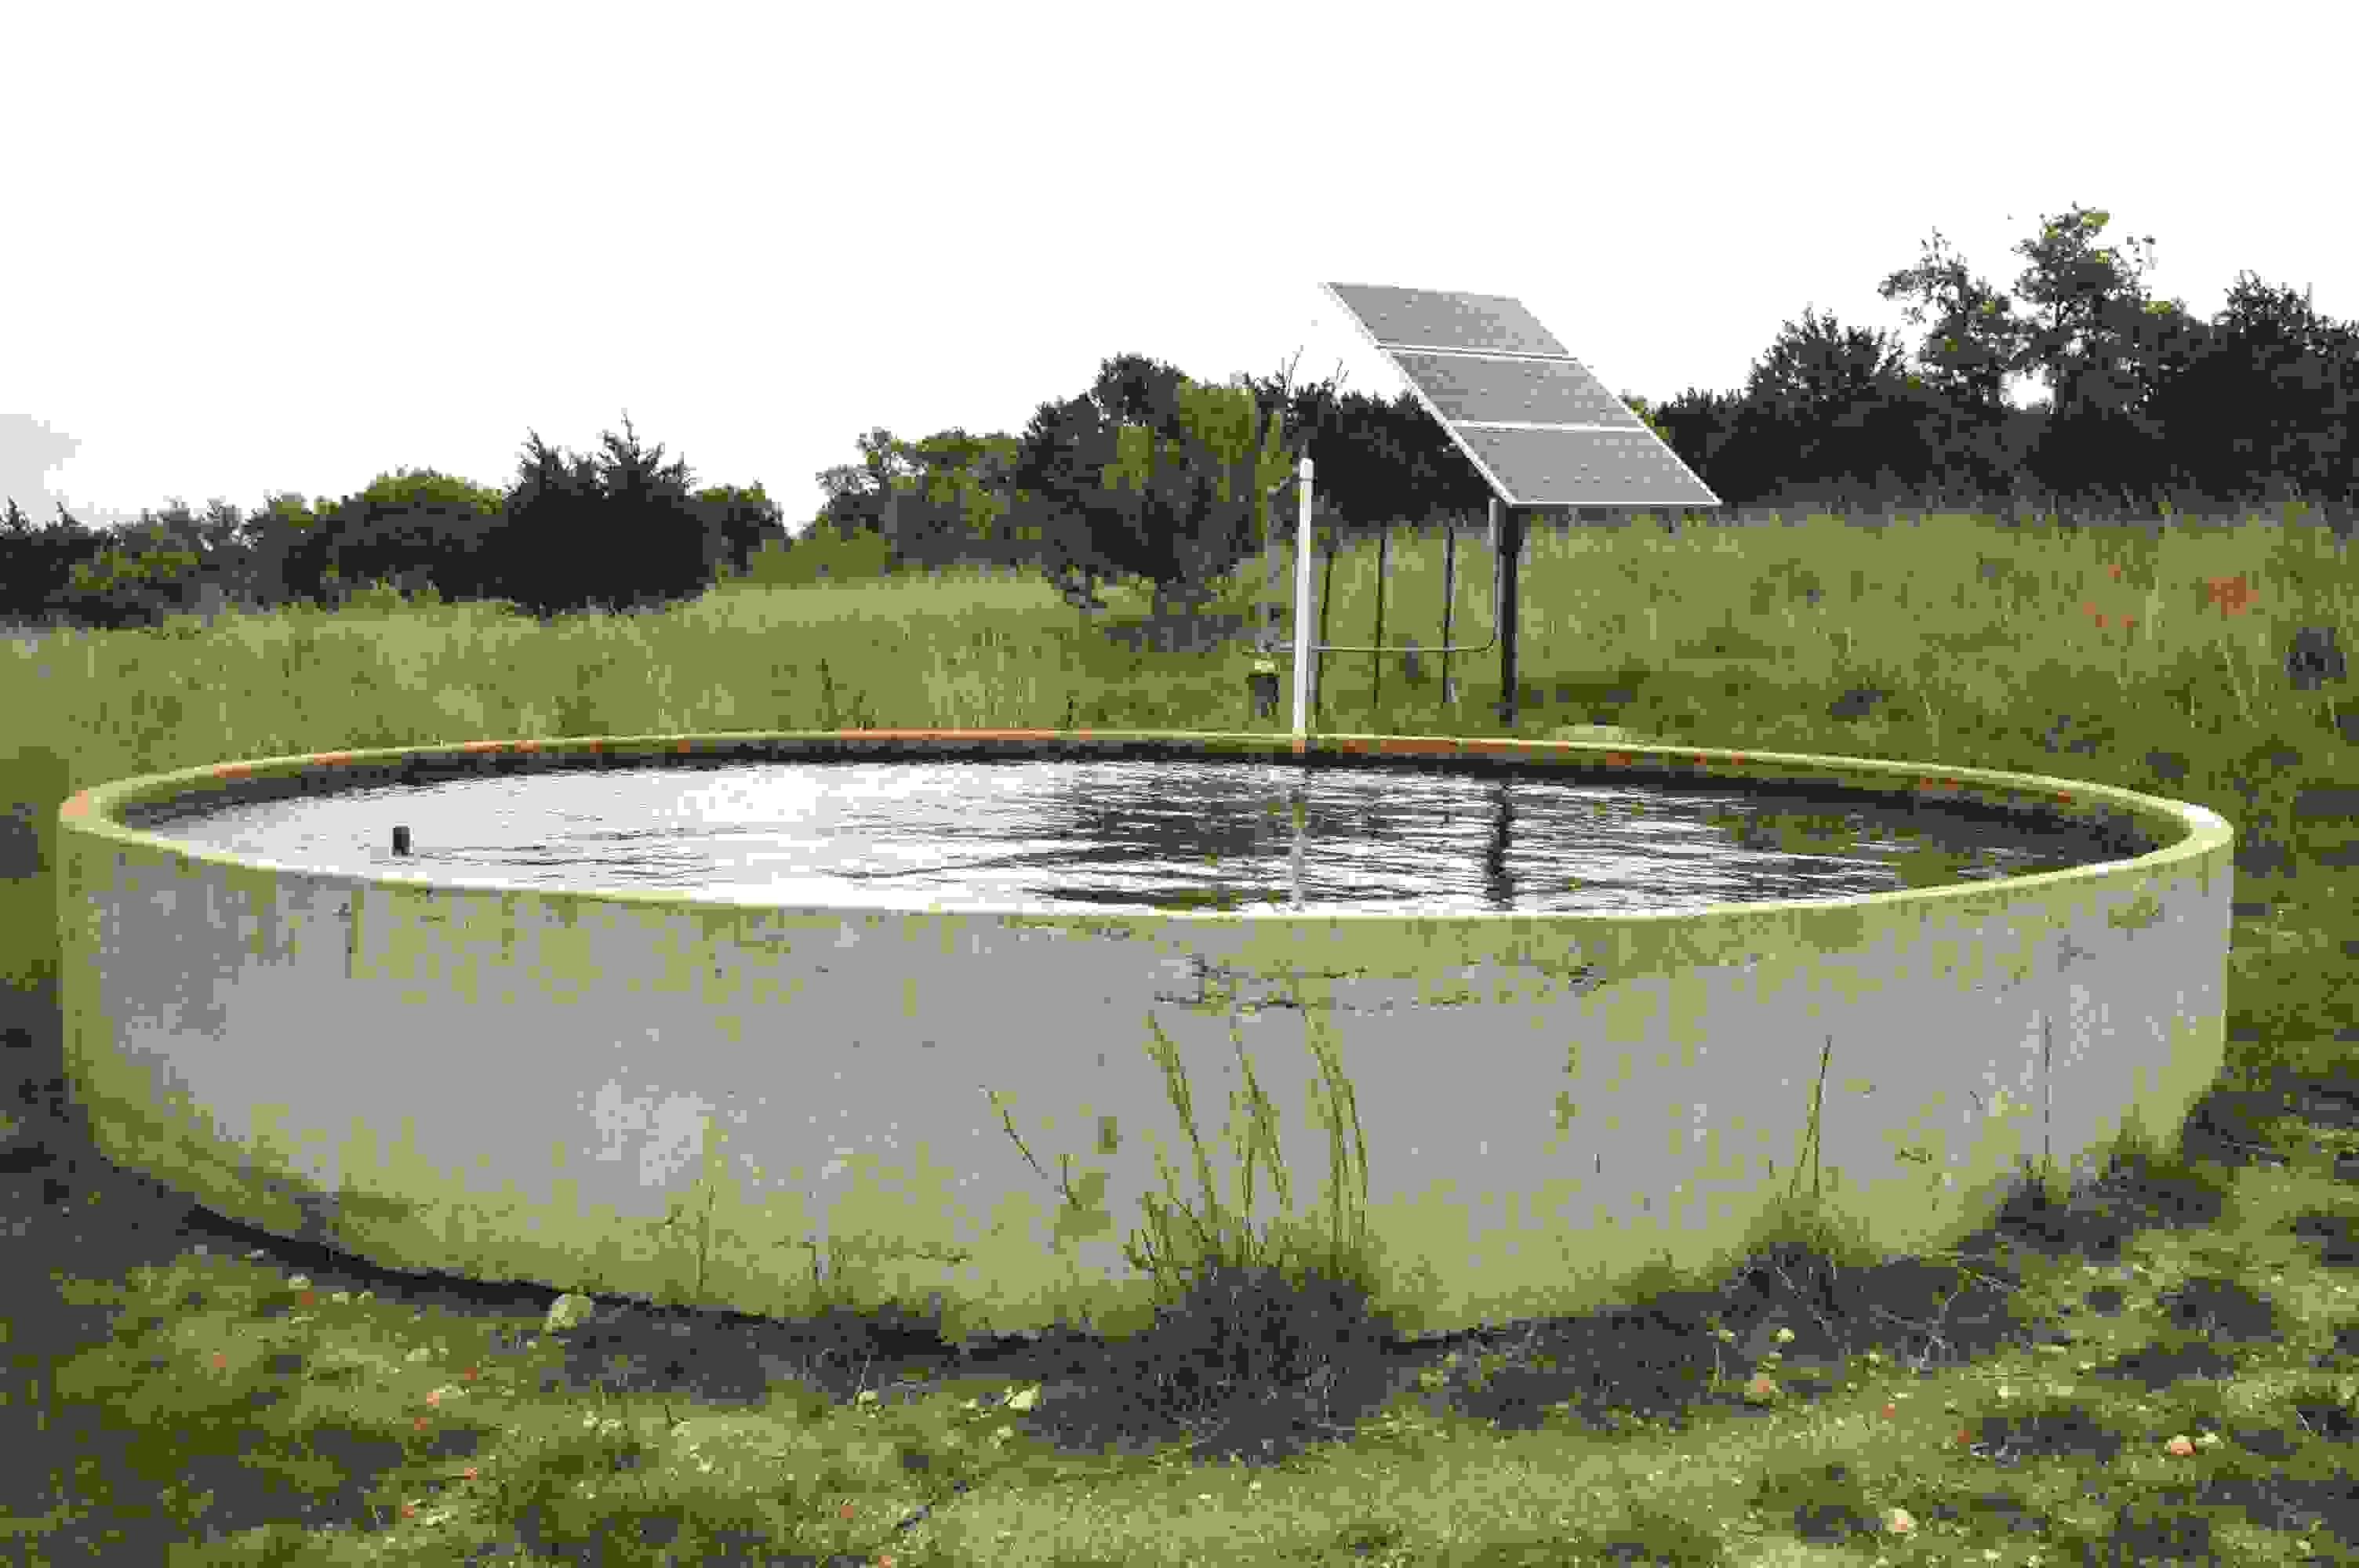 Water well owner training set for June 18 in Cleburne